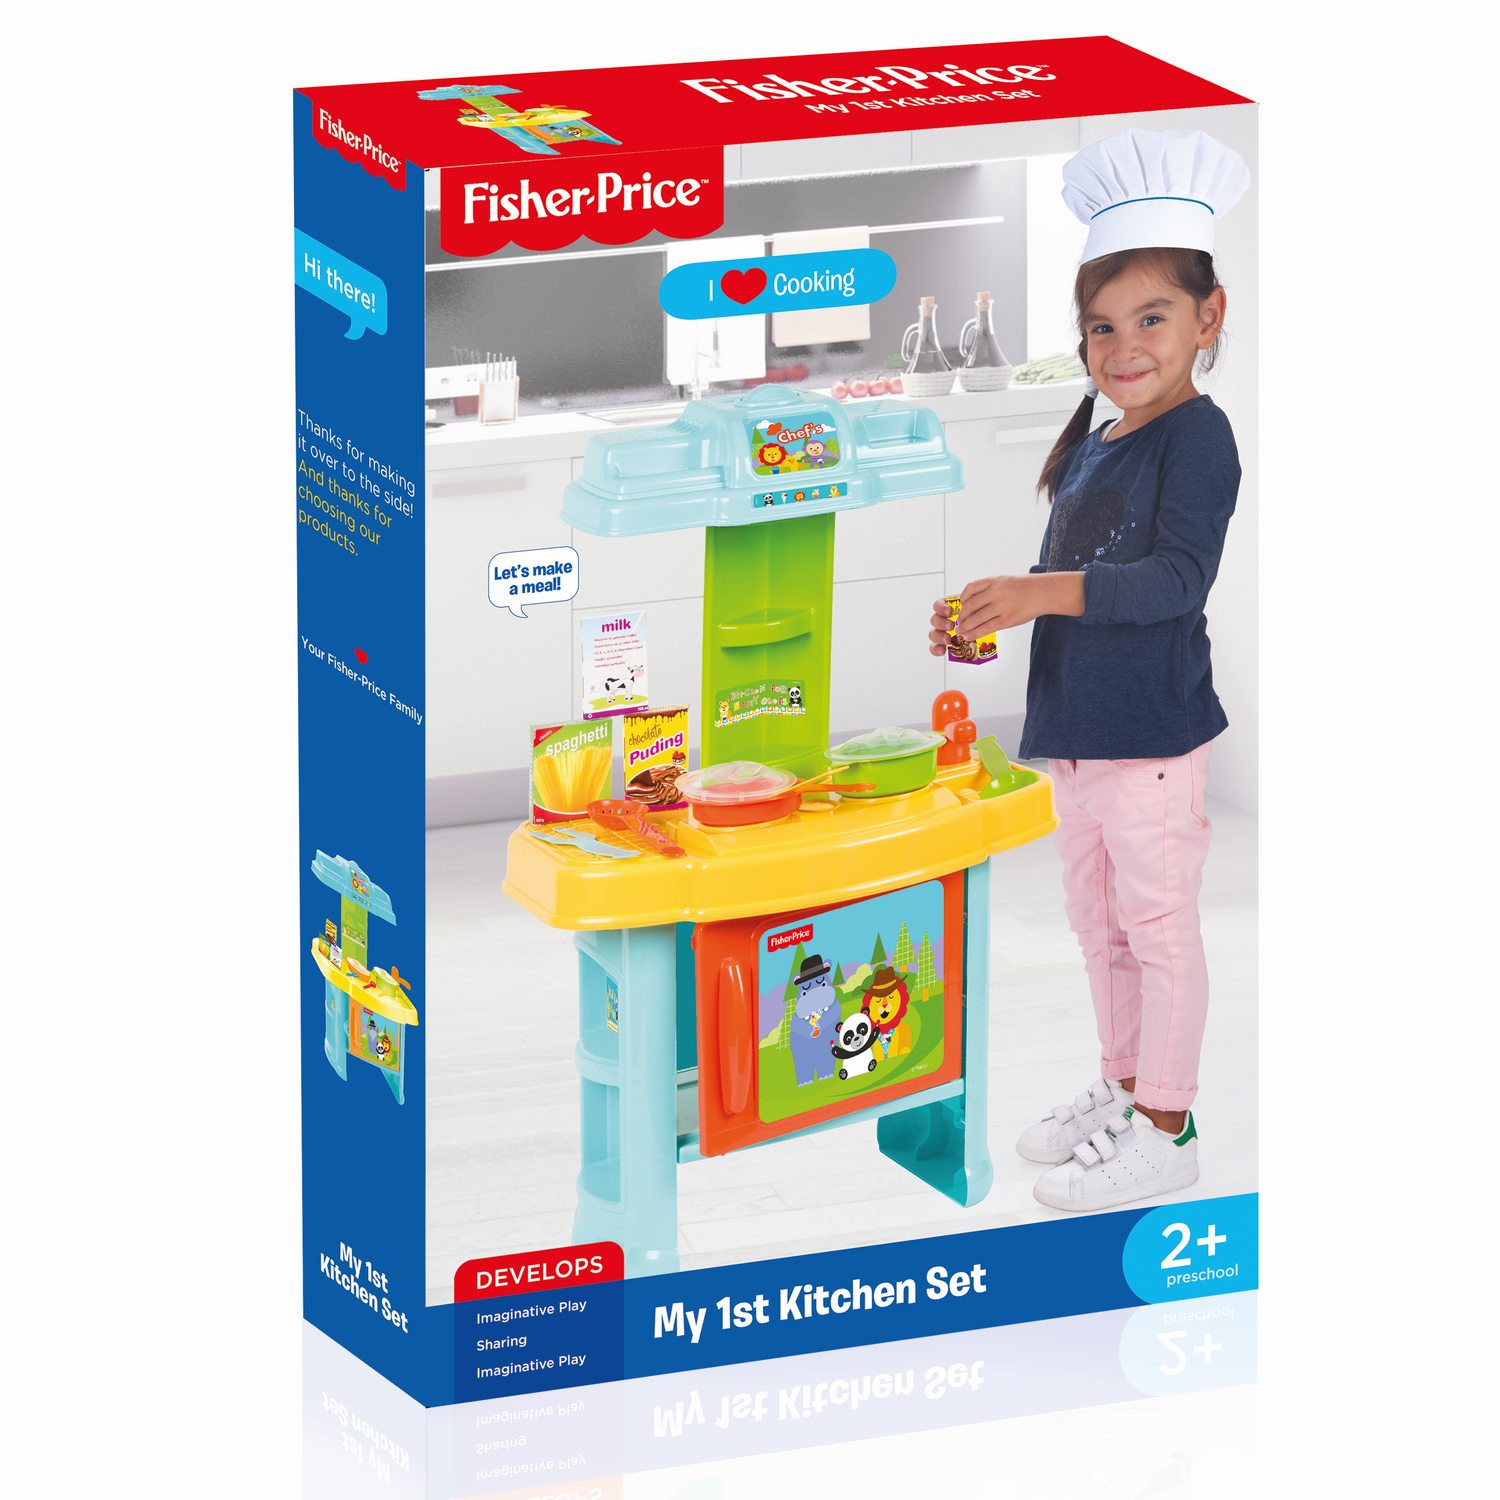 Prima mea bucatarie PlayLearn Toys